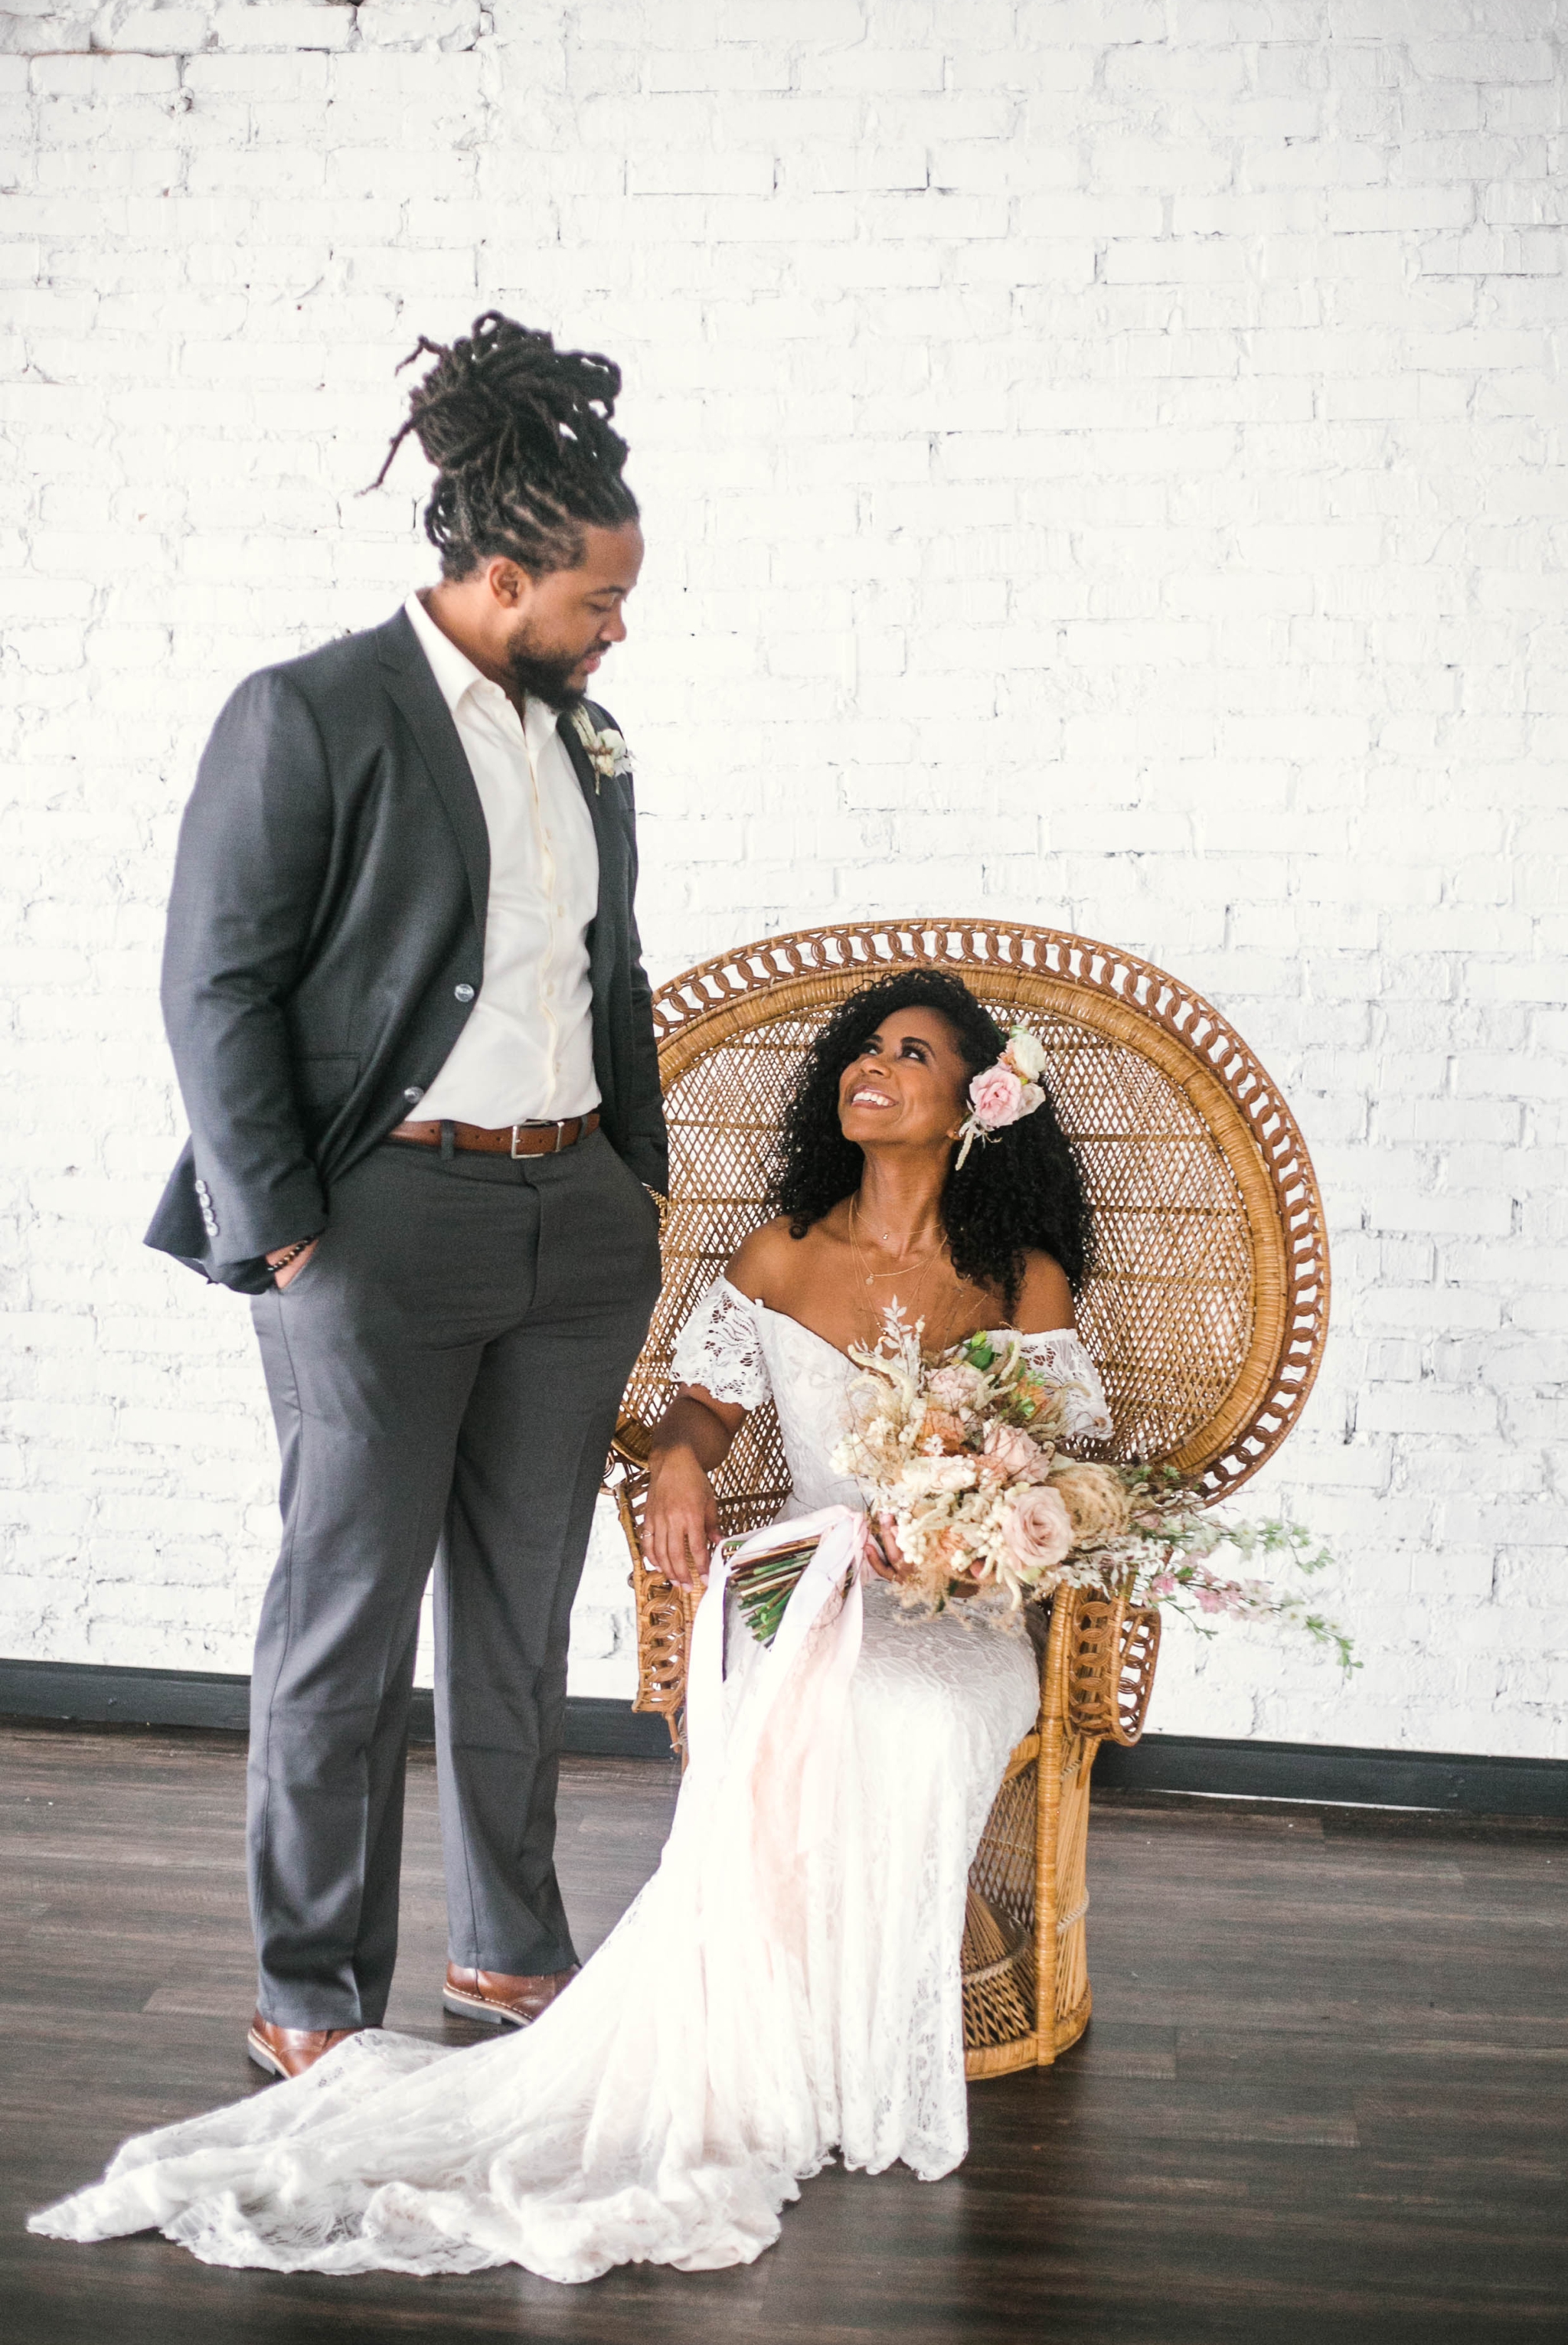  Indoor Bride and Groom Portraits, shot with natural light - black love - african american bride sitting in a Midcentury Woven Wicker Peacock Chair in a boho wedding dress with a big bouquet looking at her groom - honolulu, oahu, hawaii photographer 